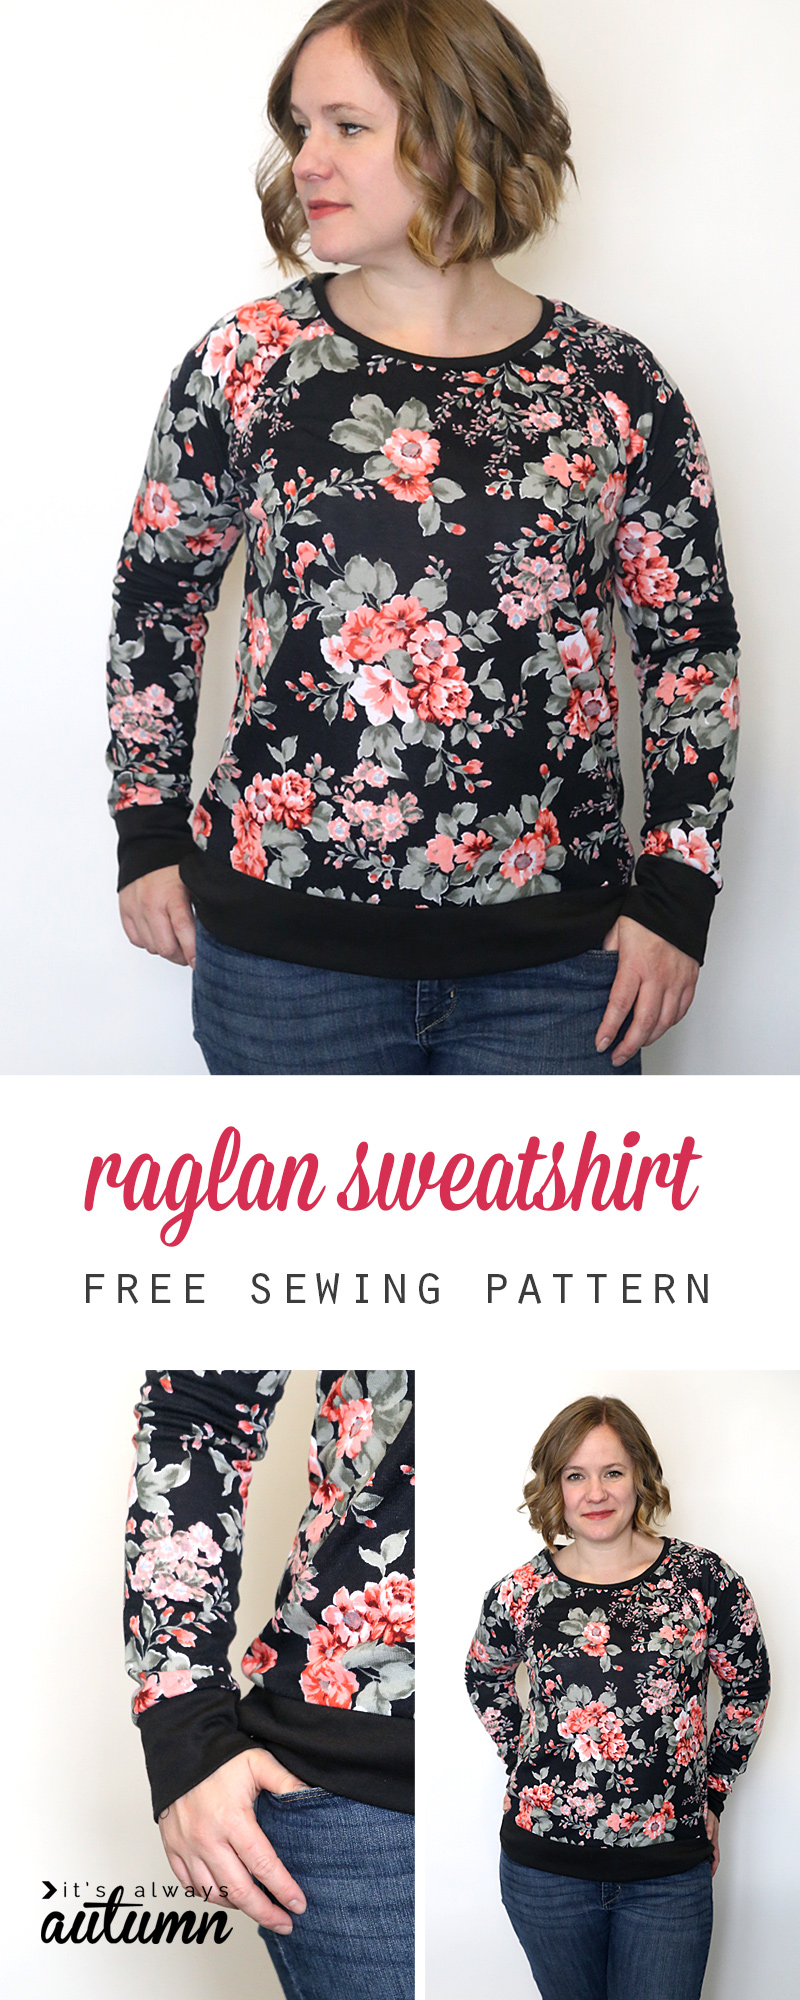 https://www.itsalwaysautumn.com/wp-content/uploads/2016/02/easy-raglan-sleeve-sweatshirt-free-pattern-how-to-sew-sewing-tutorial-womens-top-floral-how-to-make-1.jpg